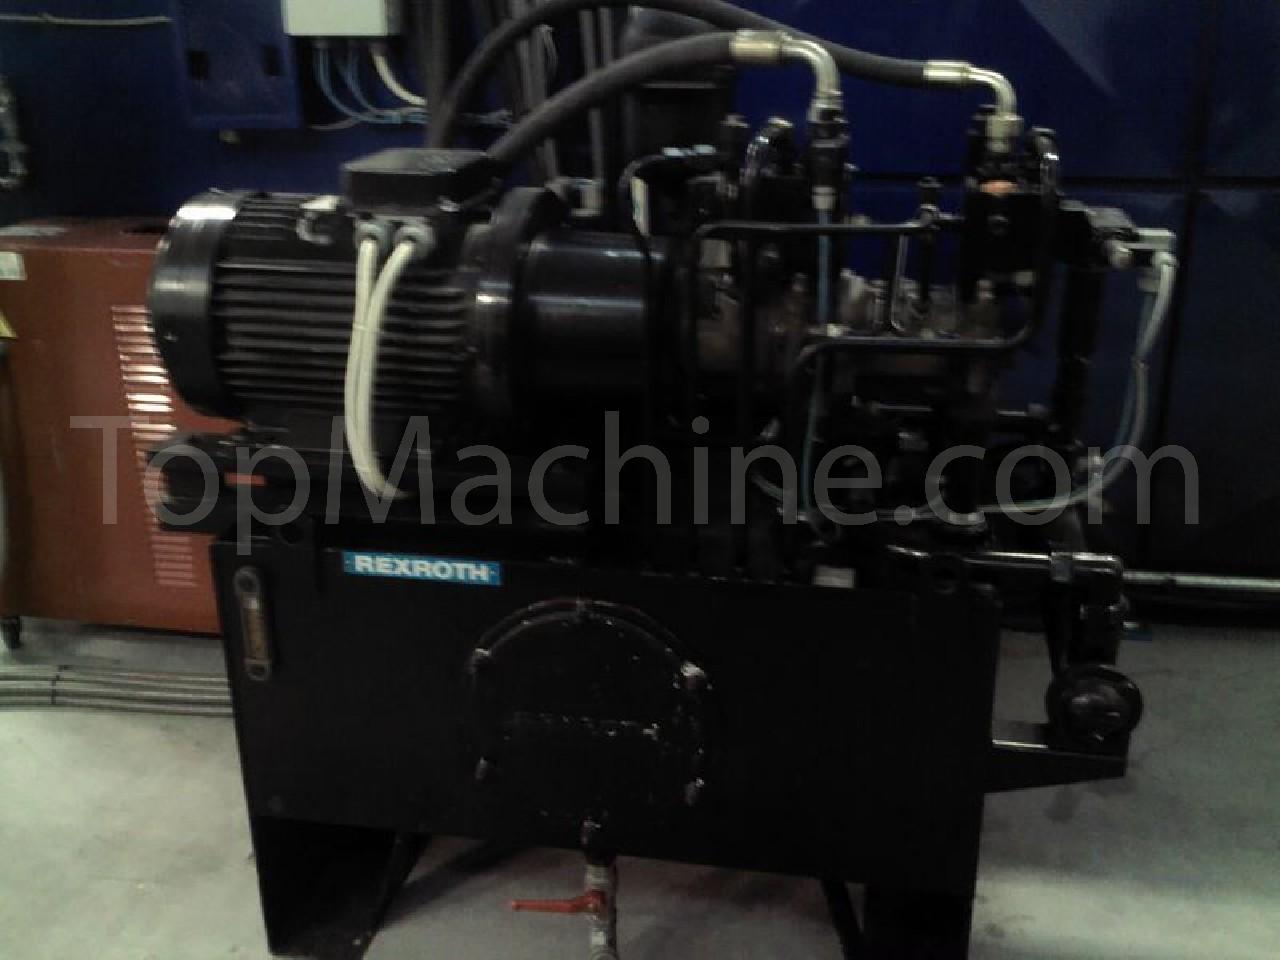 Used De Vecchi SF-FC-20-10-06 Thermoforming & Sheet Vacuum forming